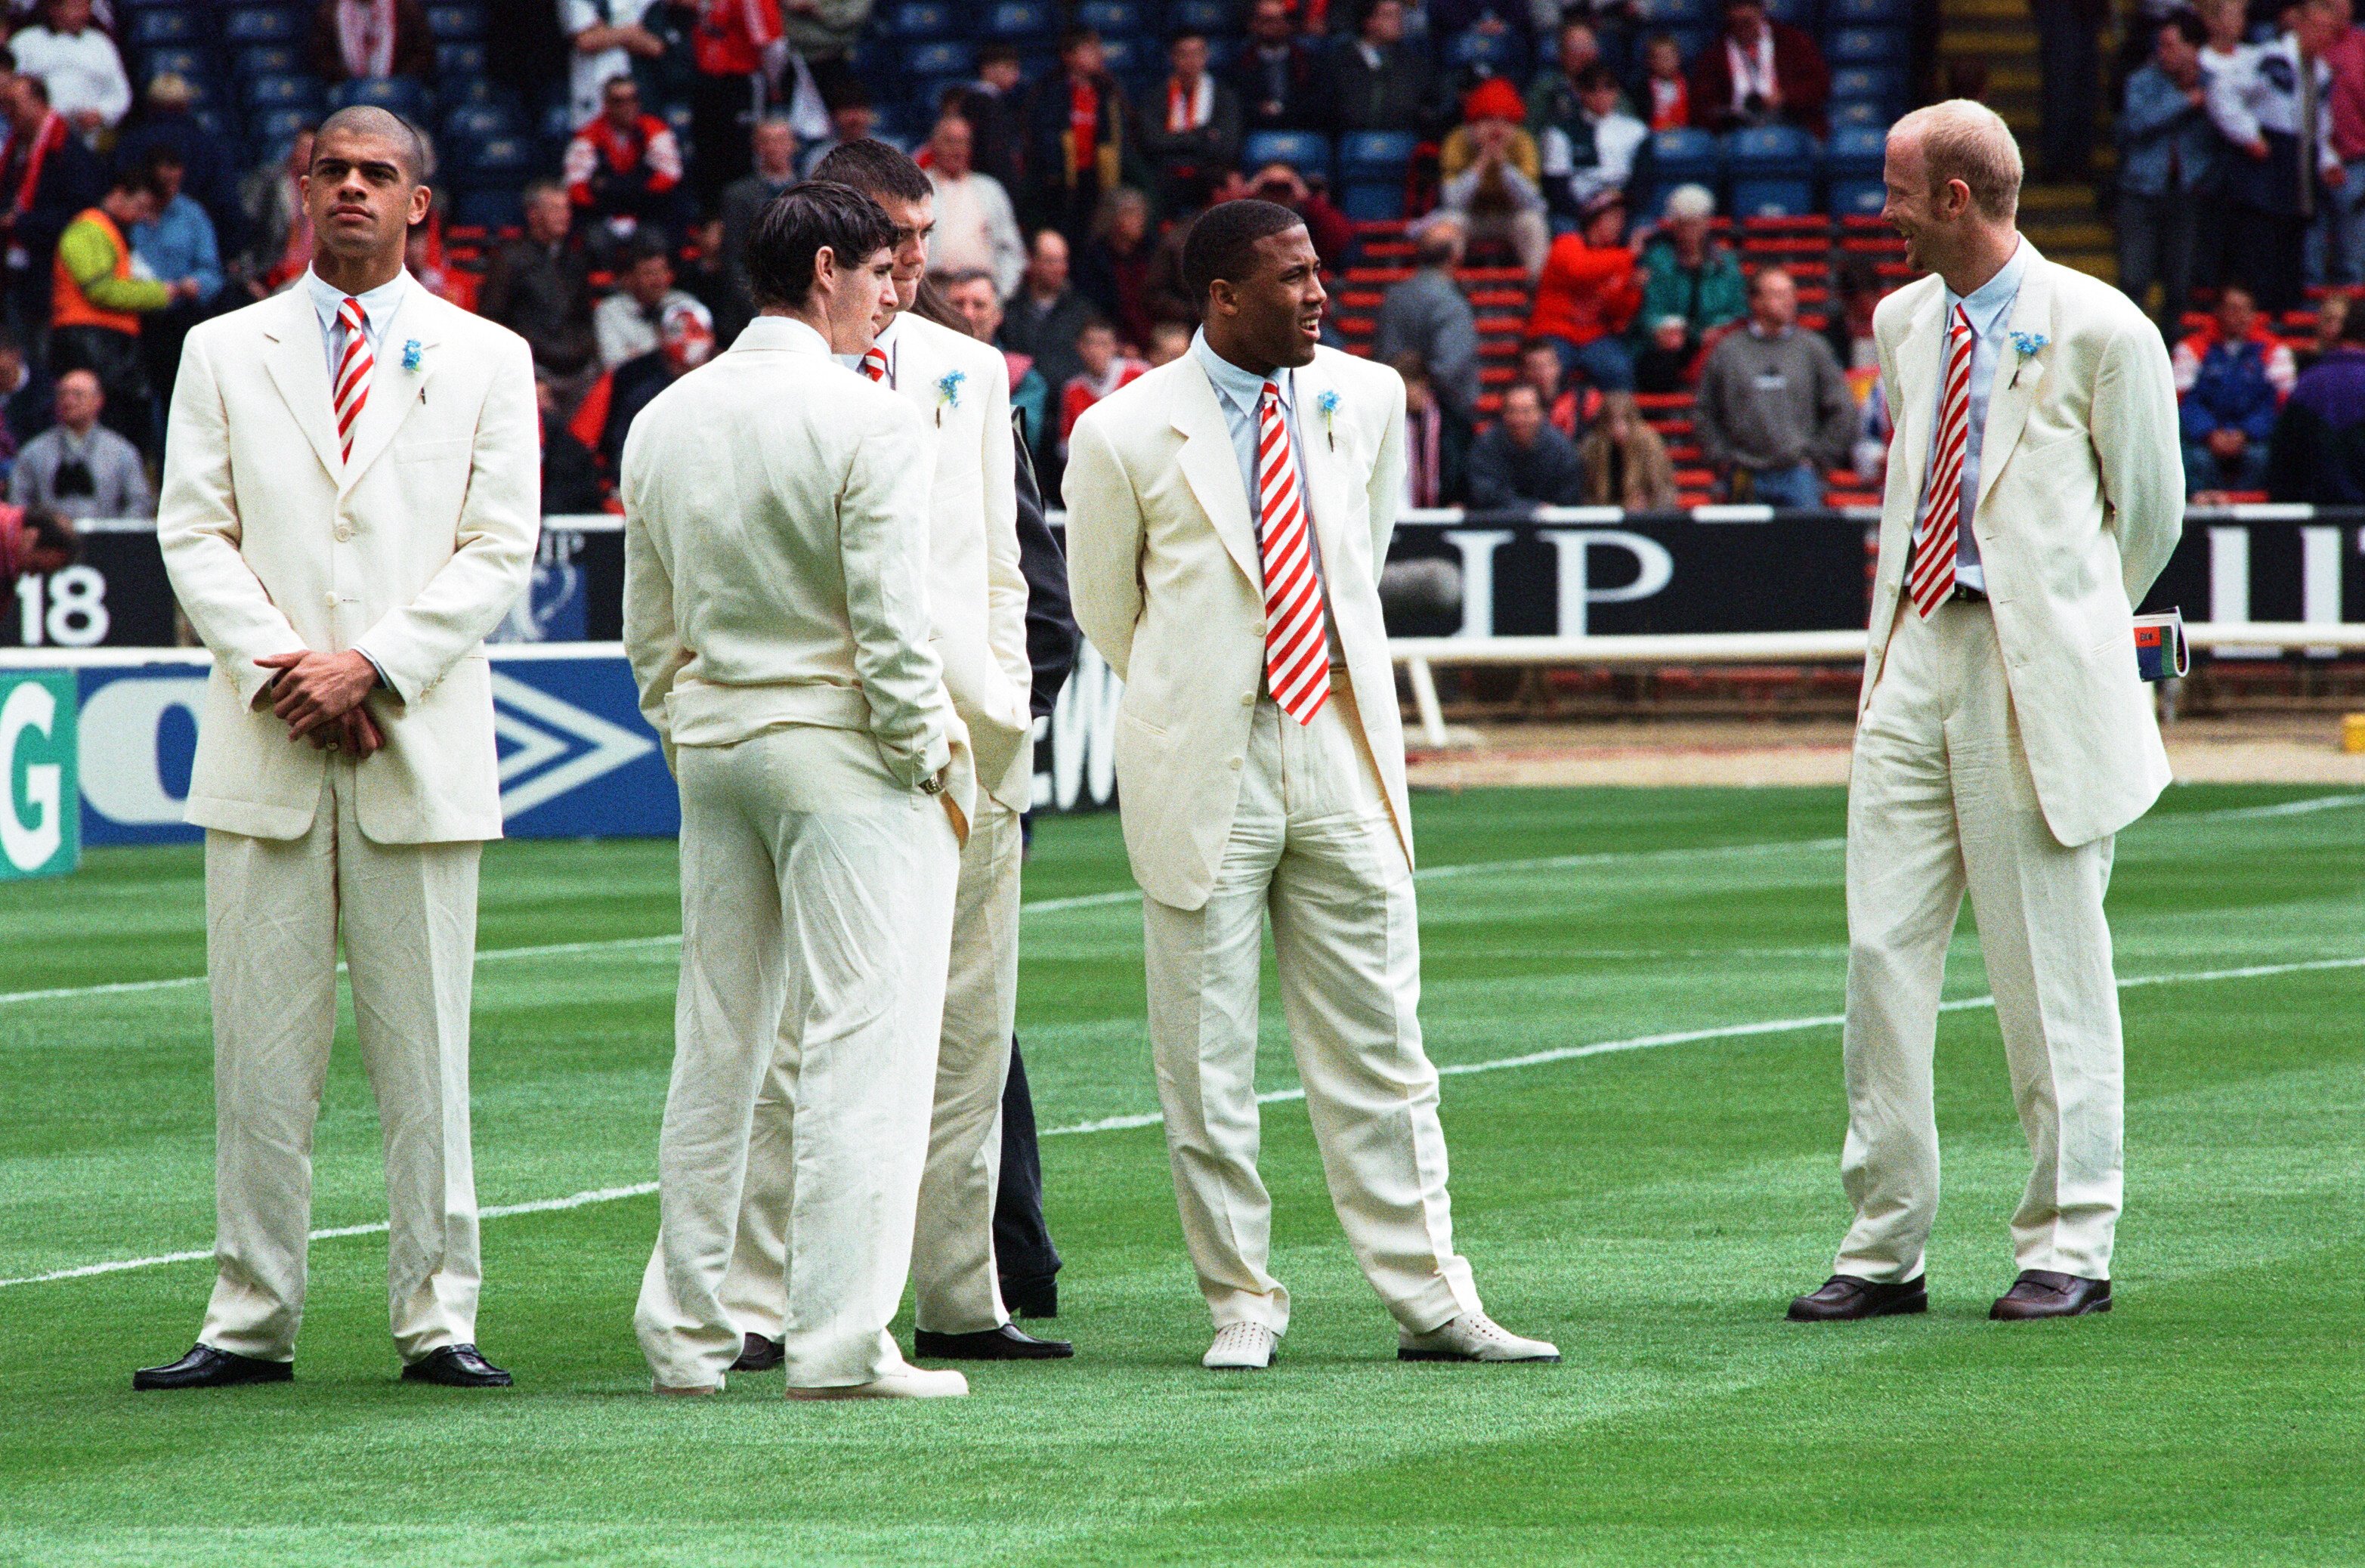 Mark Wright (right) and John Barnes with their Liverpool teammates on the pitch at Wembley before the start of the 1996 FA Cup final against Manchester United. Photo: Getty Images